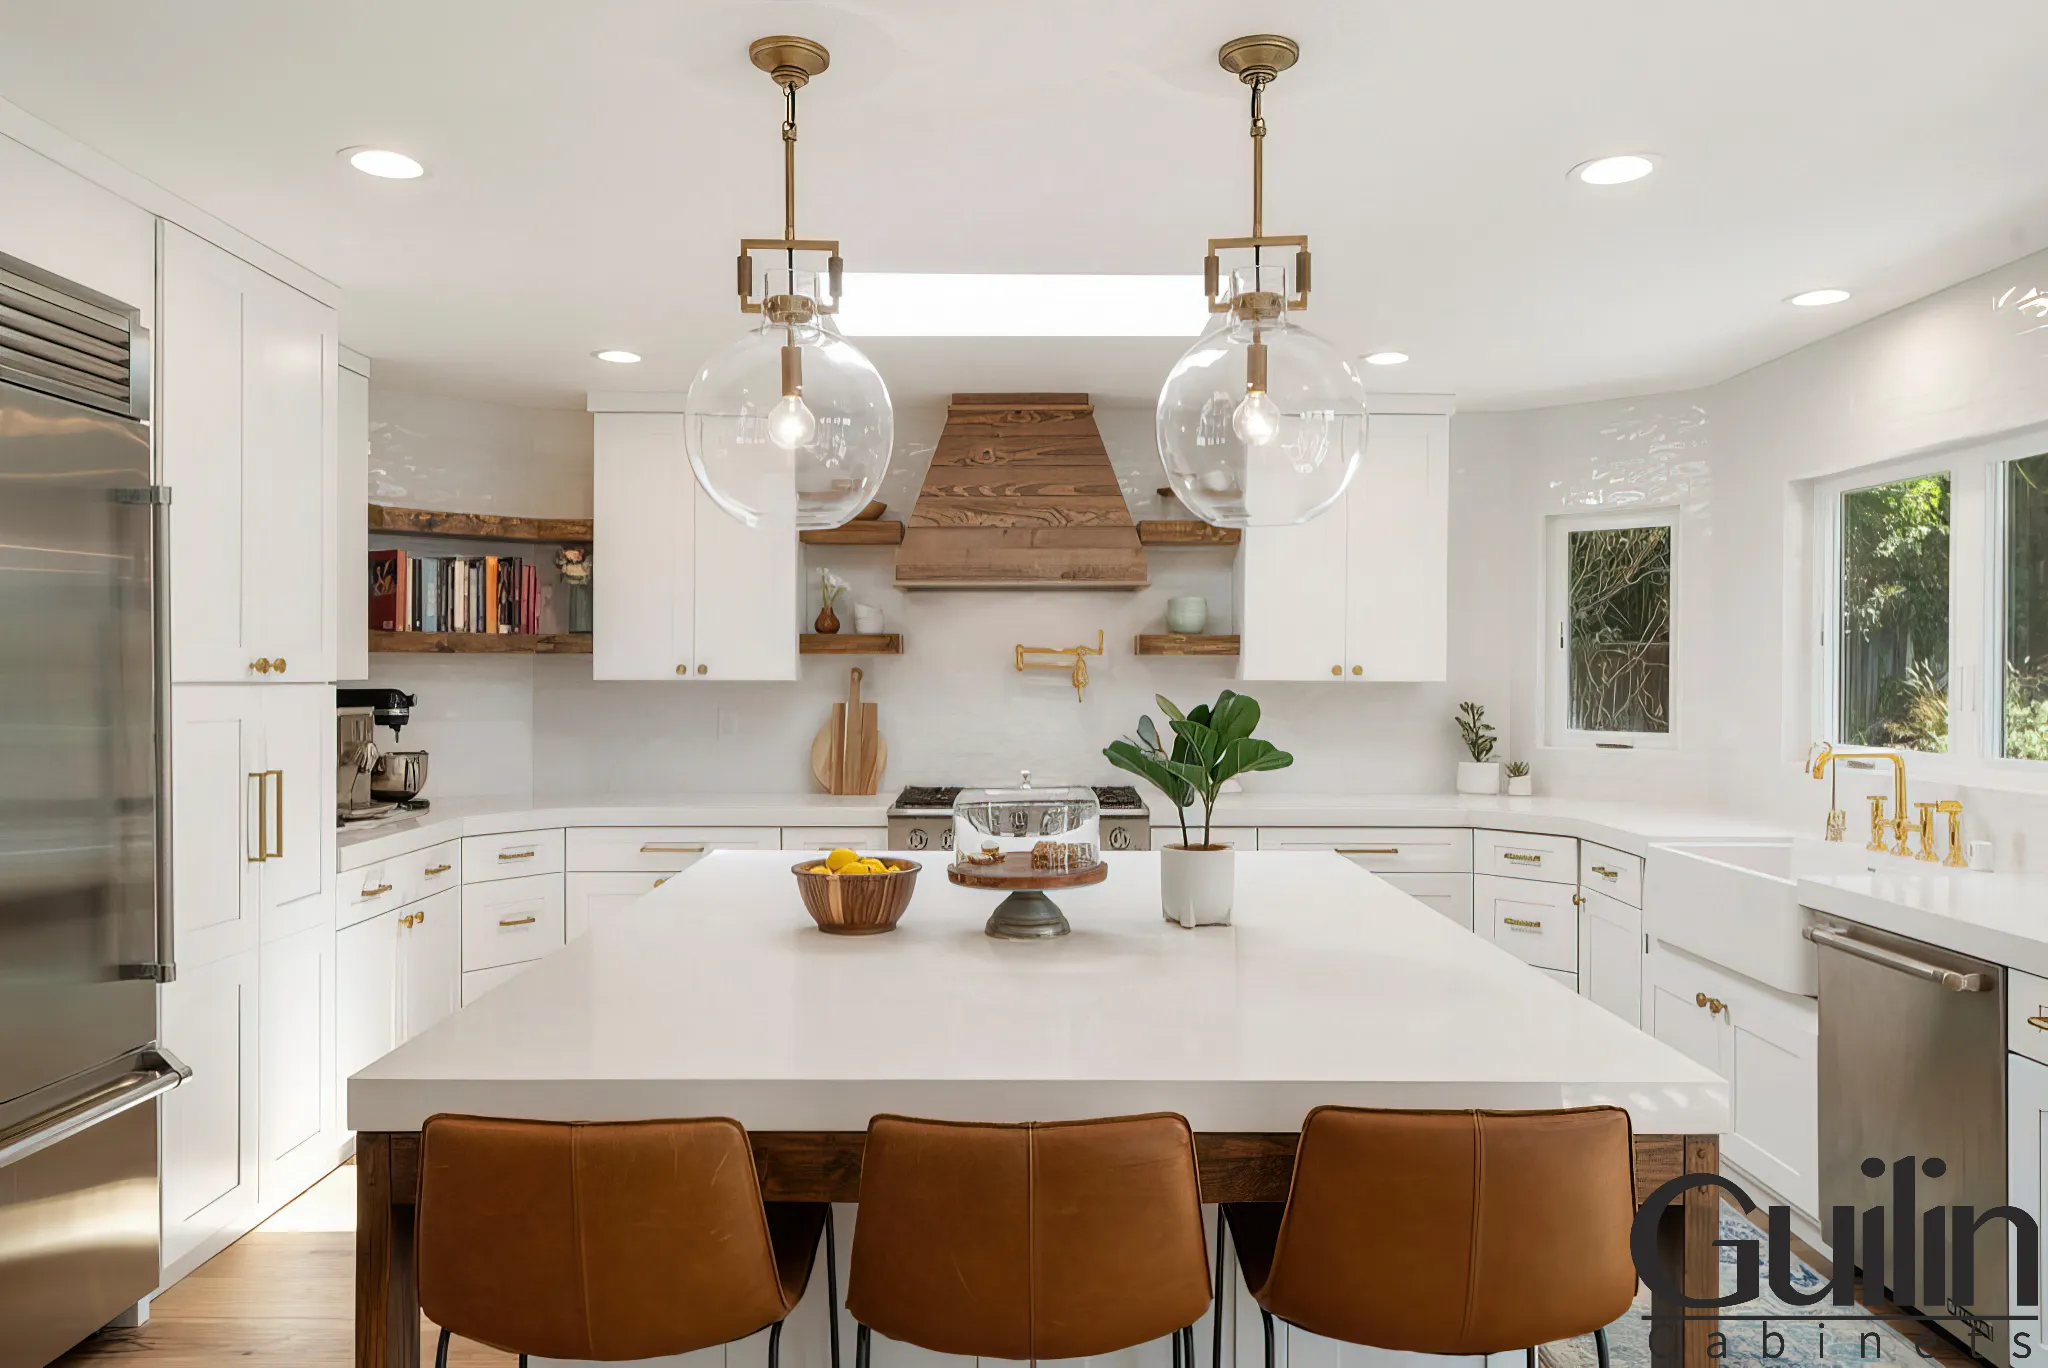 White is known for its natural ability to reflect light and create a sense of spaciousness.